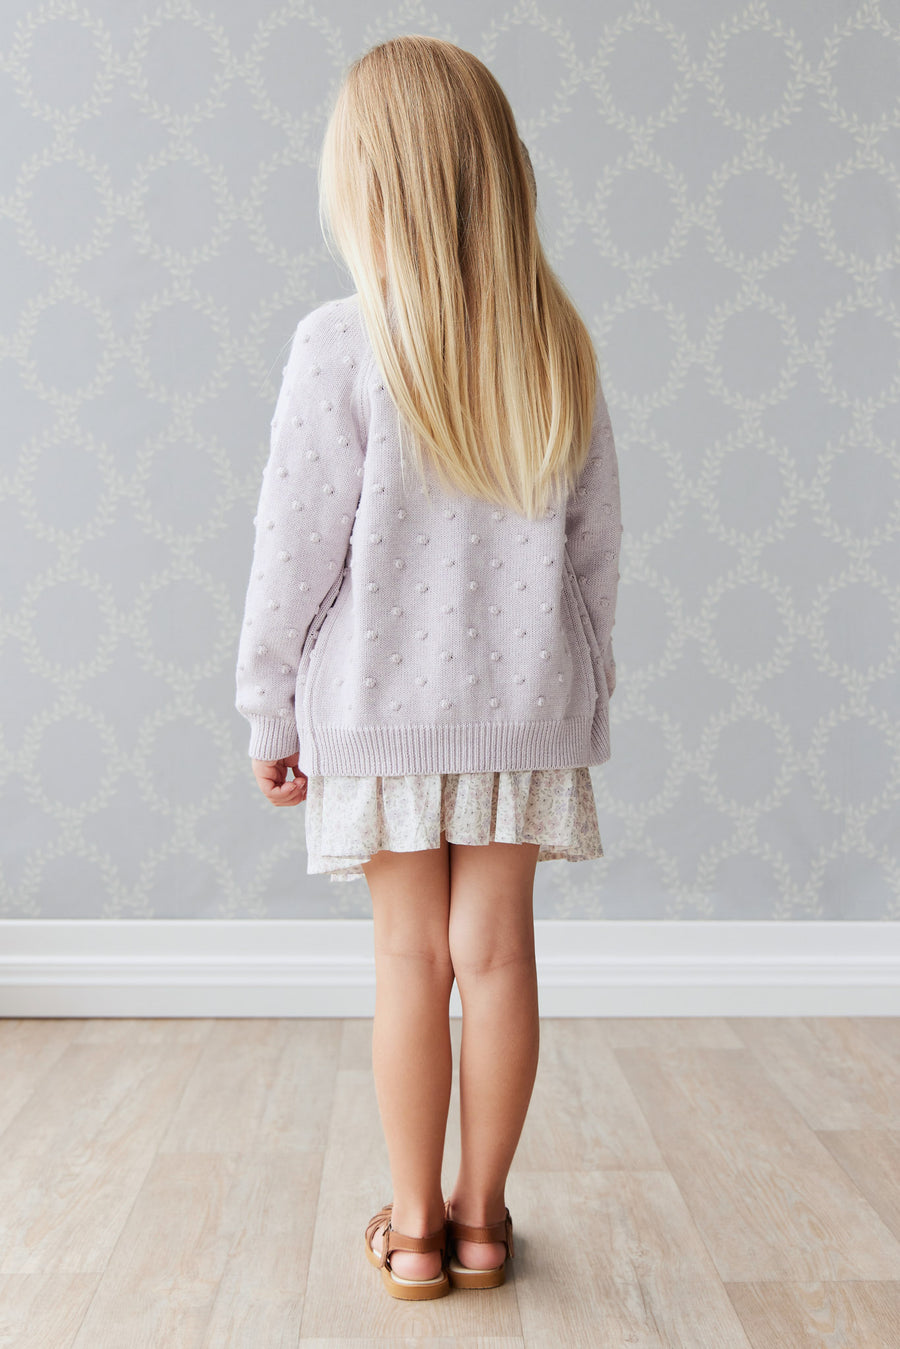 OG Dotty Knit Cardigan - Pale Lilac Marle Childrens Cardigan from Jamie Kay NZ